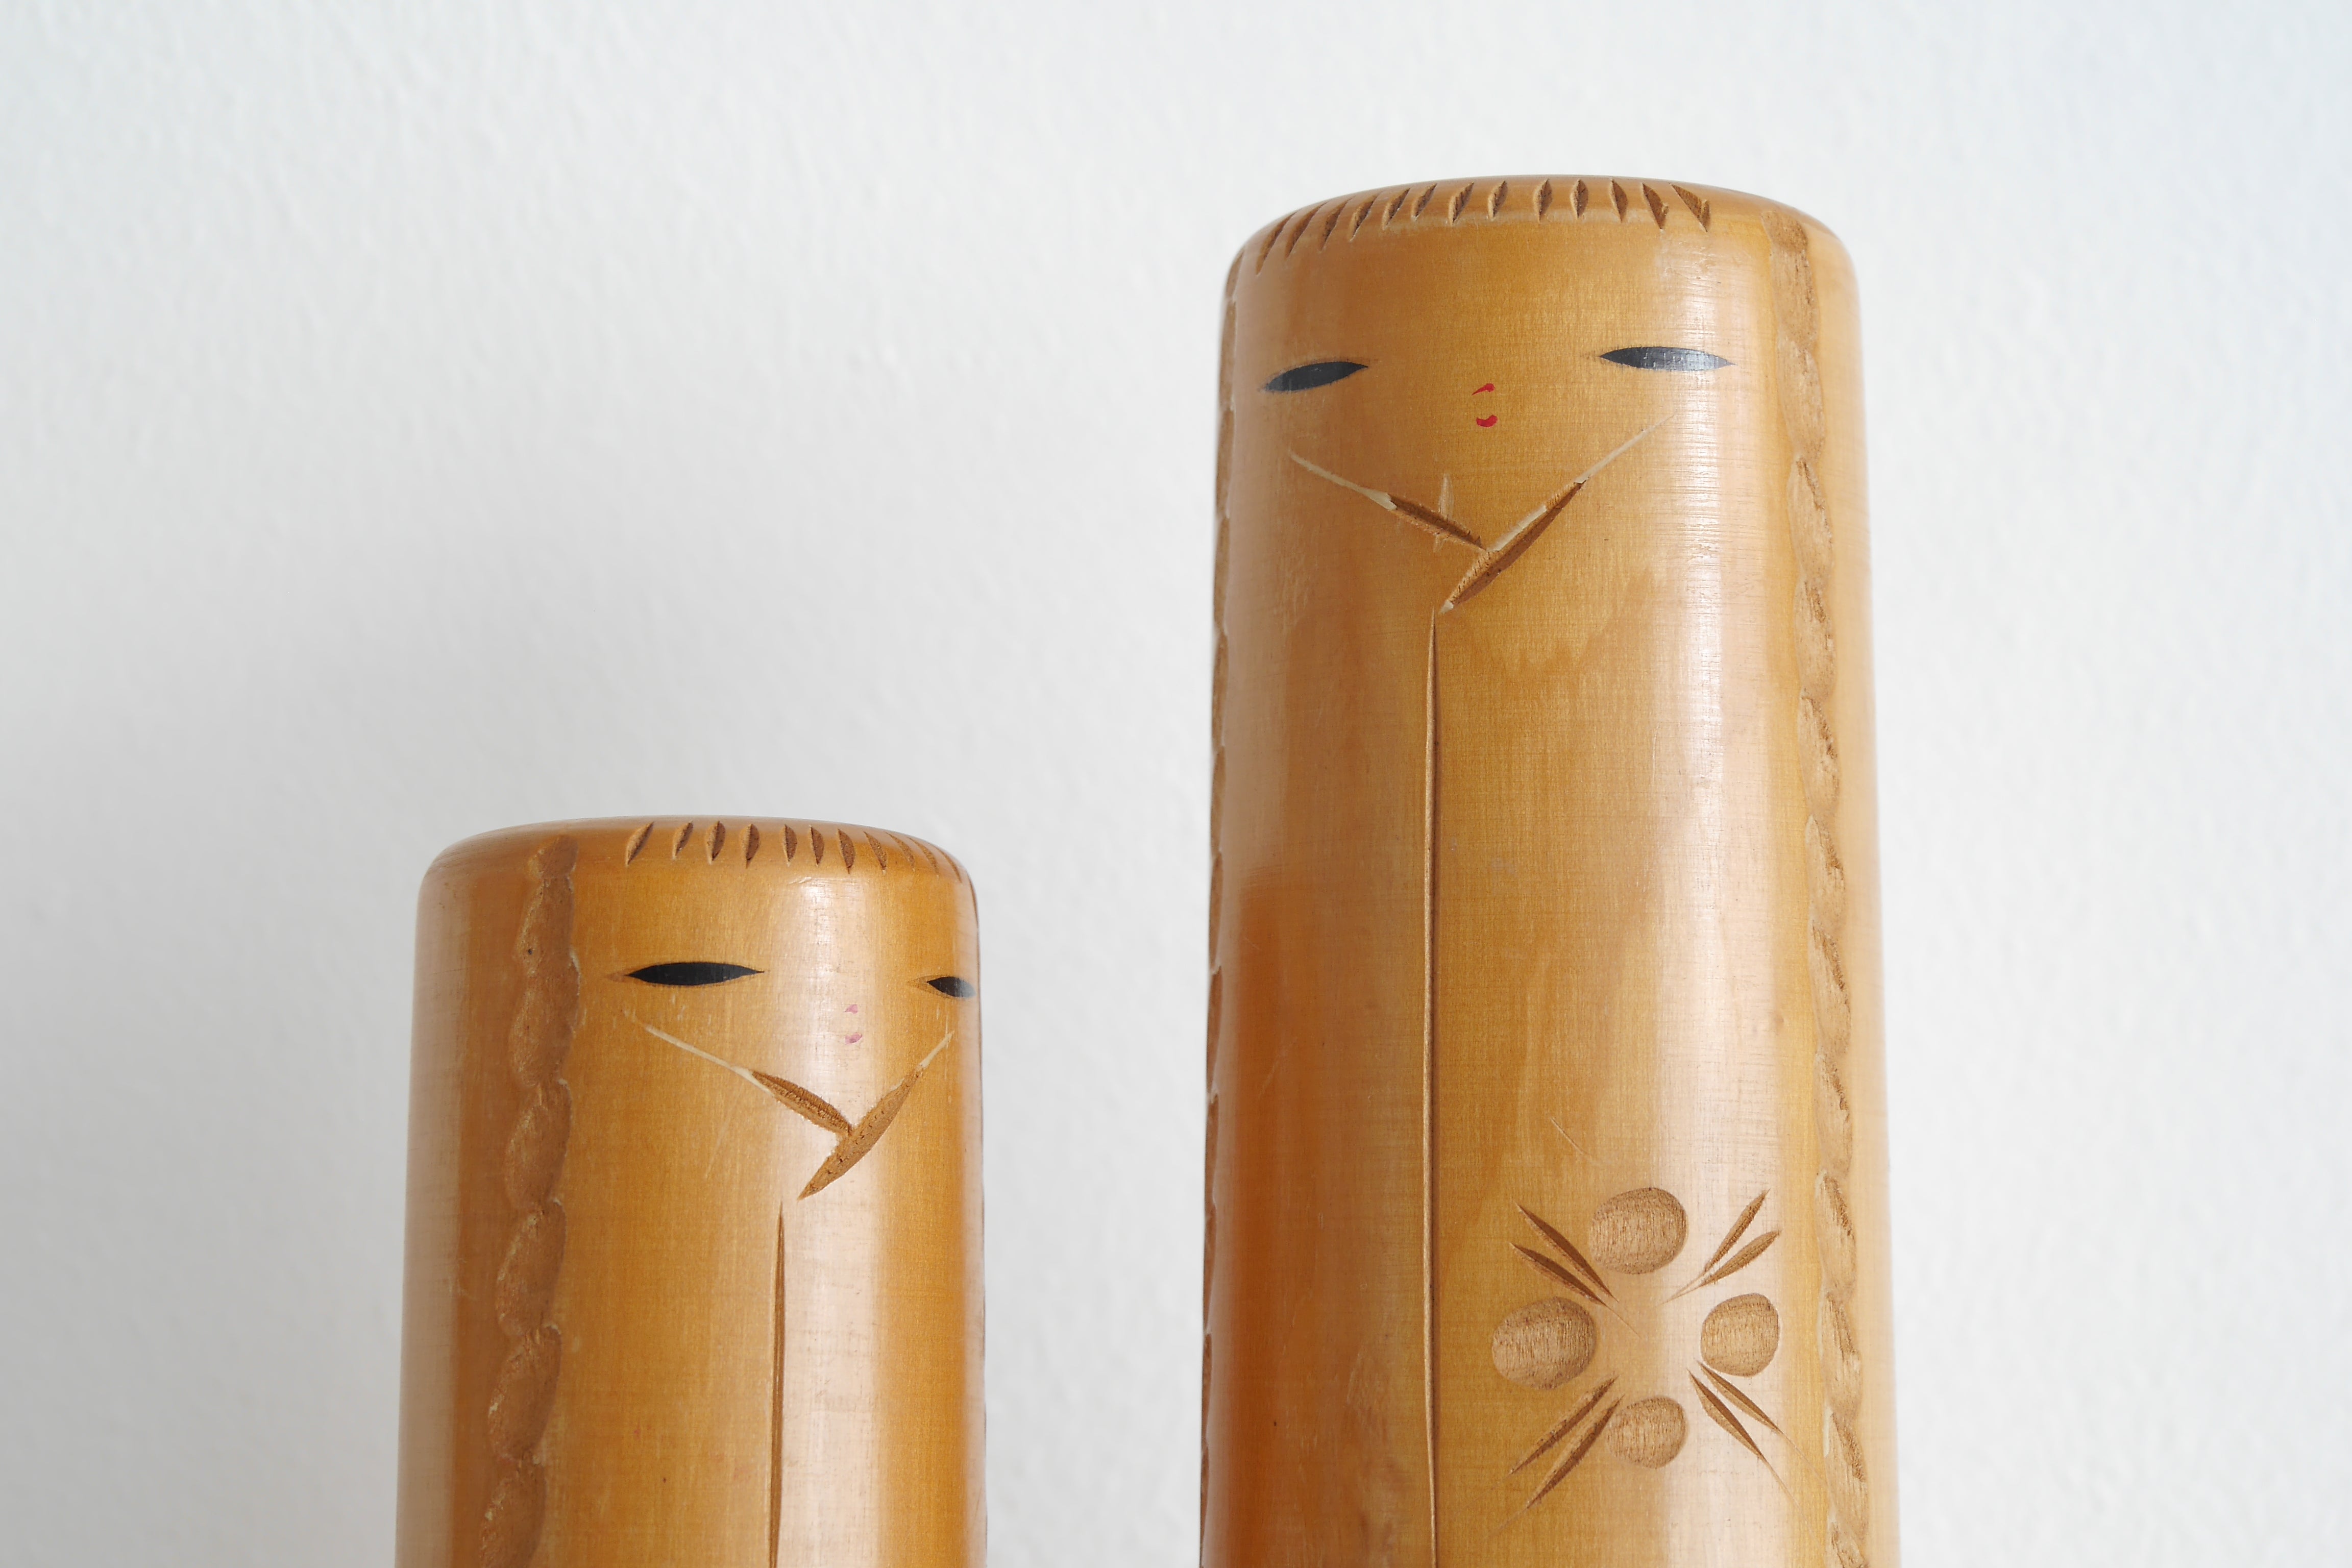 Pair of Vintage Creative Kokeshi by Chiyomatsu Kanou (1935-unknown) | 18 cm and 23,5 cm